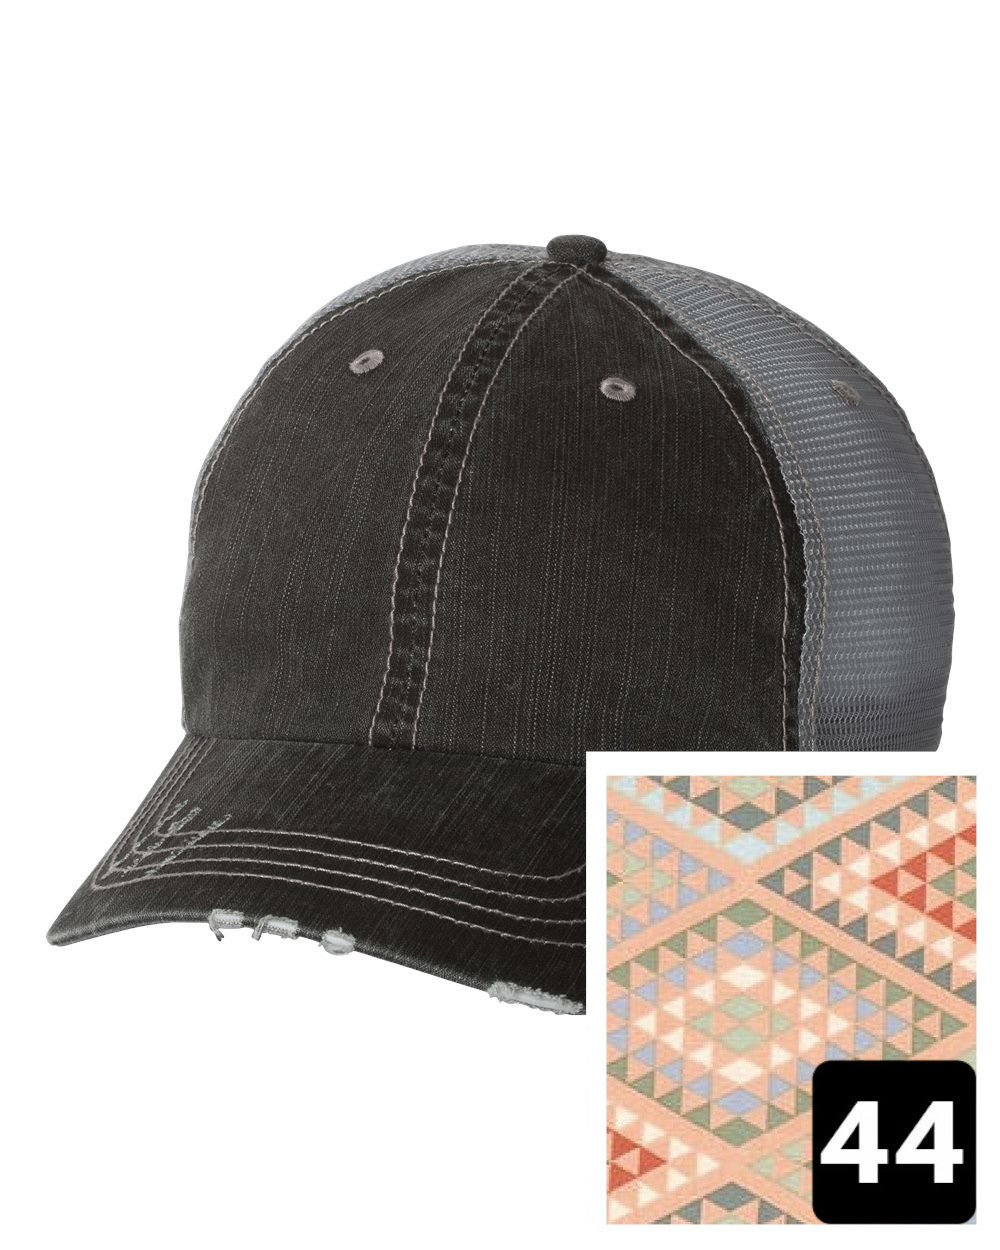 gray distressed trucker hat with navy coral and white chevron fabric state of California